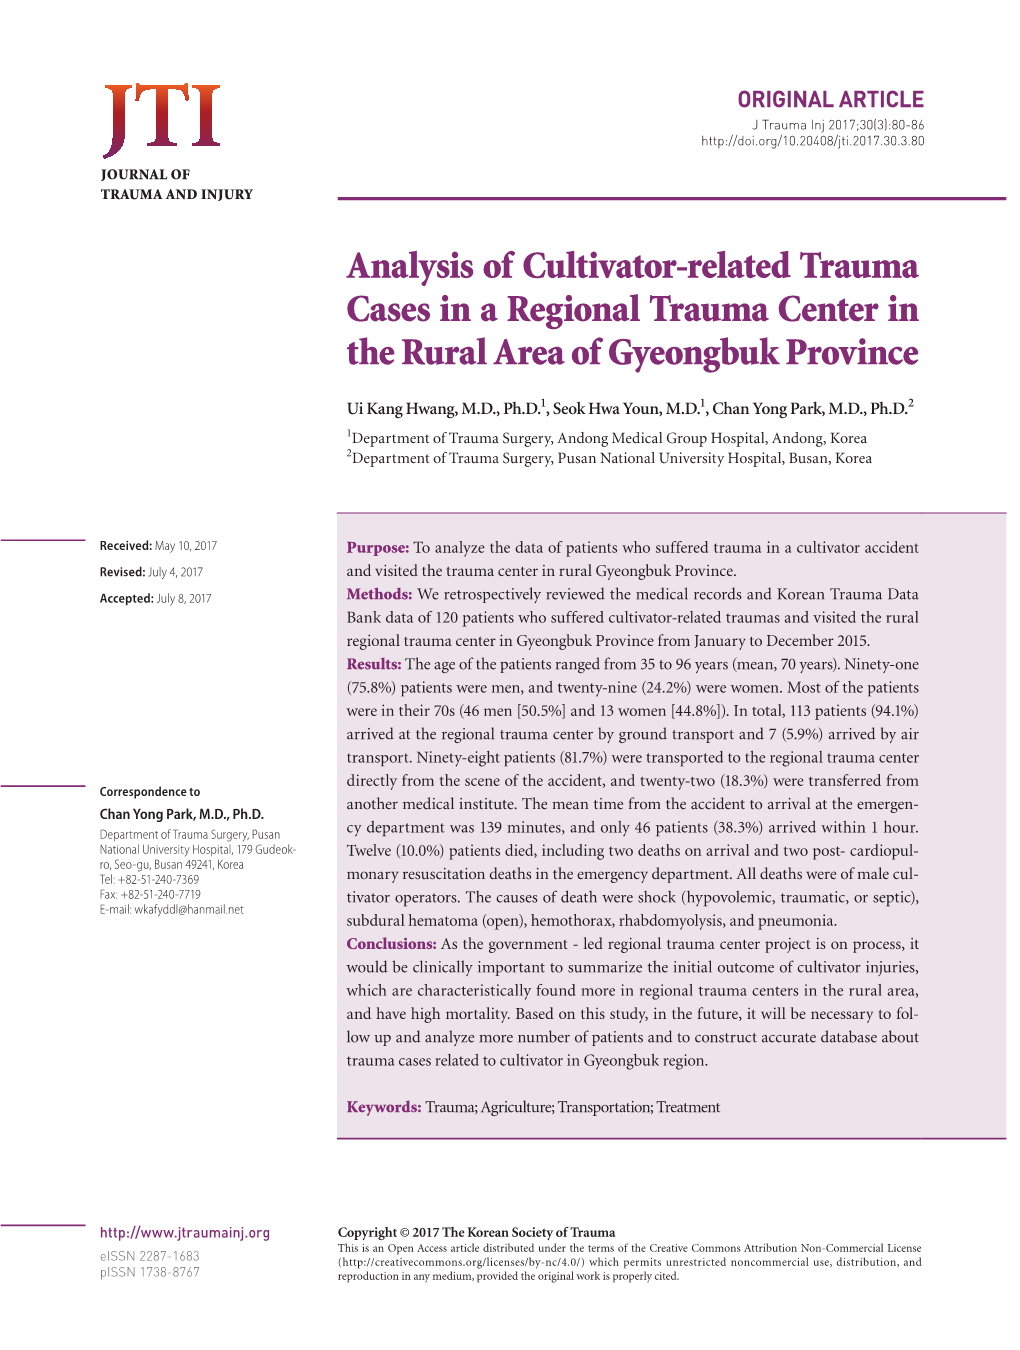 Analysis of Cultivator-Related Trauma Cases in a Regional Trauma Center in the Rural Area of Gyeongbuk Province